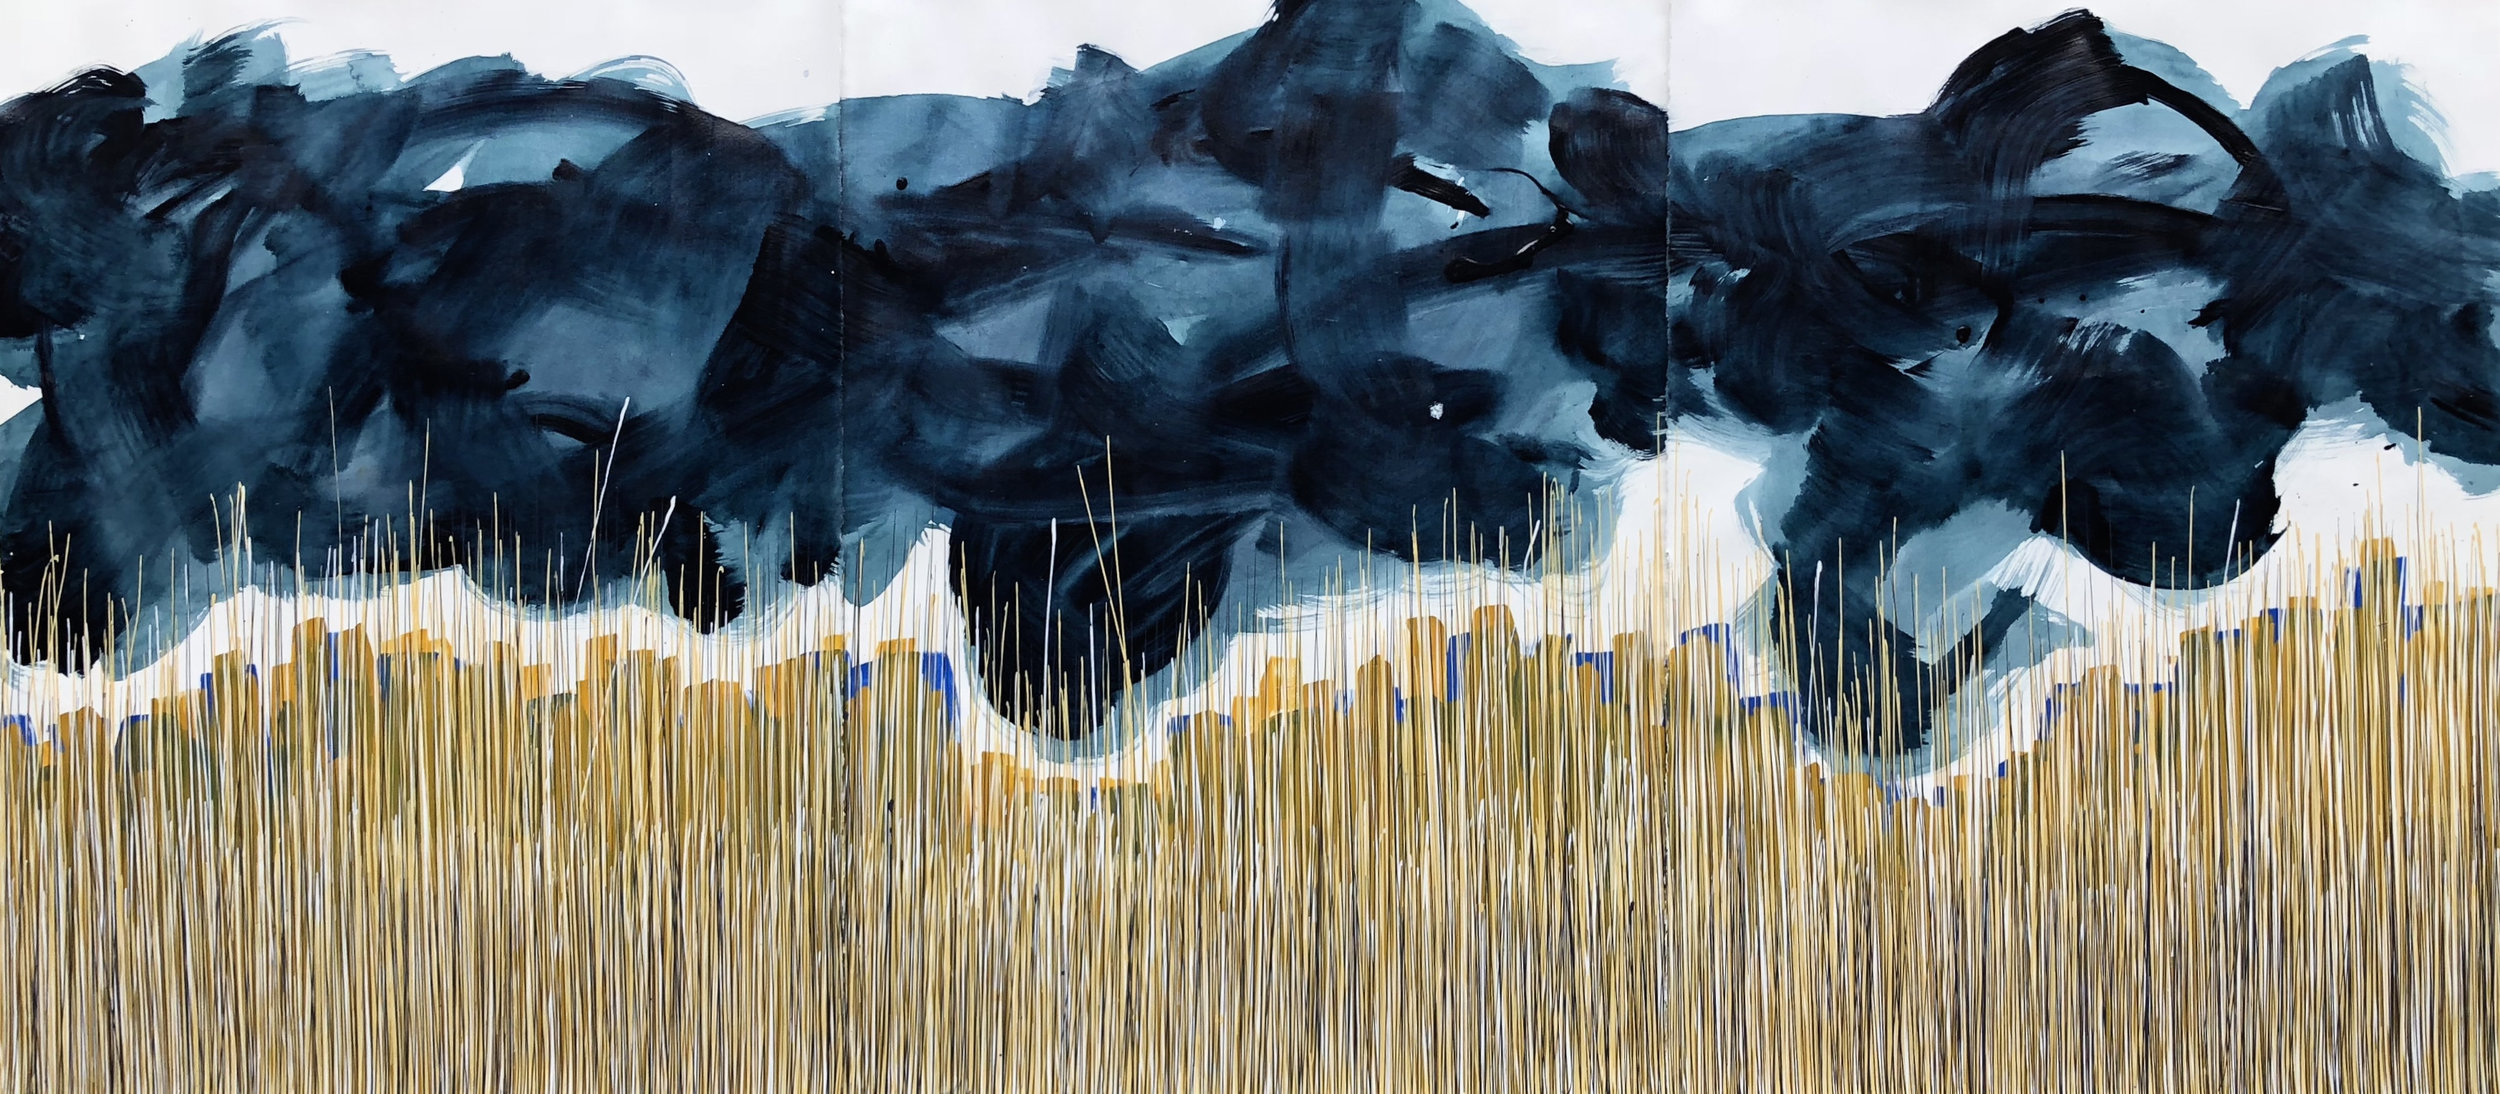 Solitude Standing, 2018 | 30" x 66" | Acrylic on paper